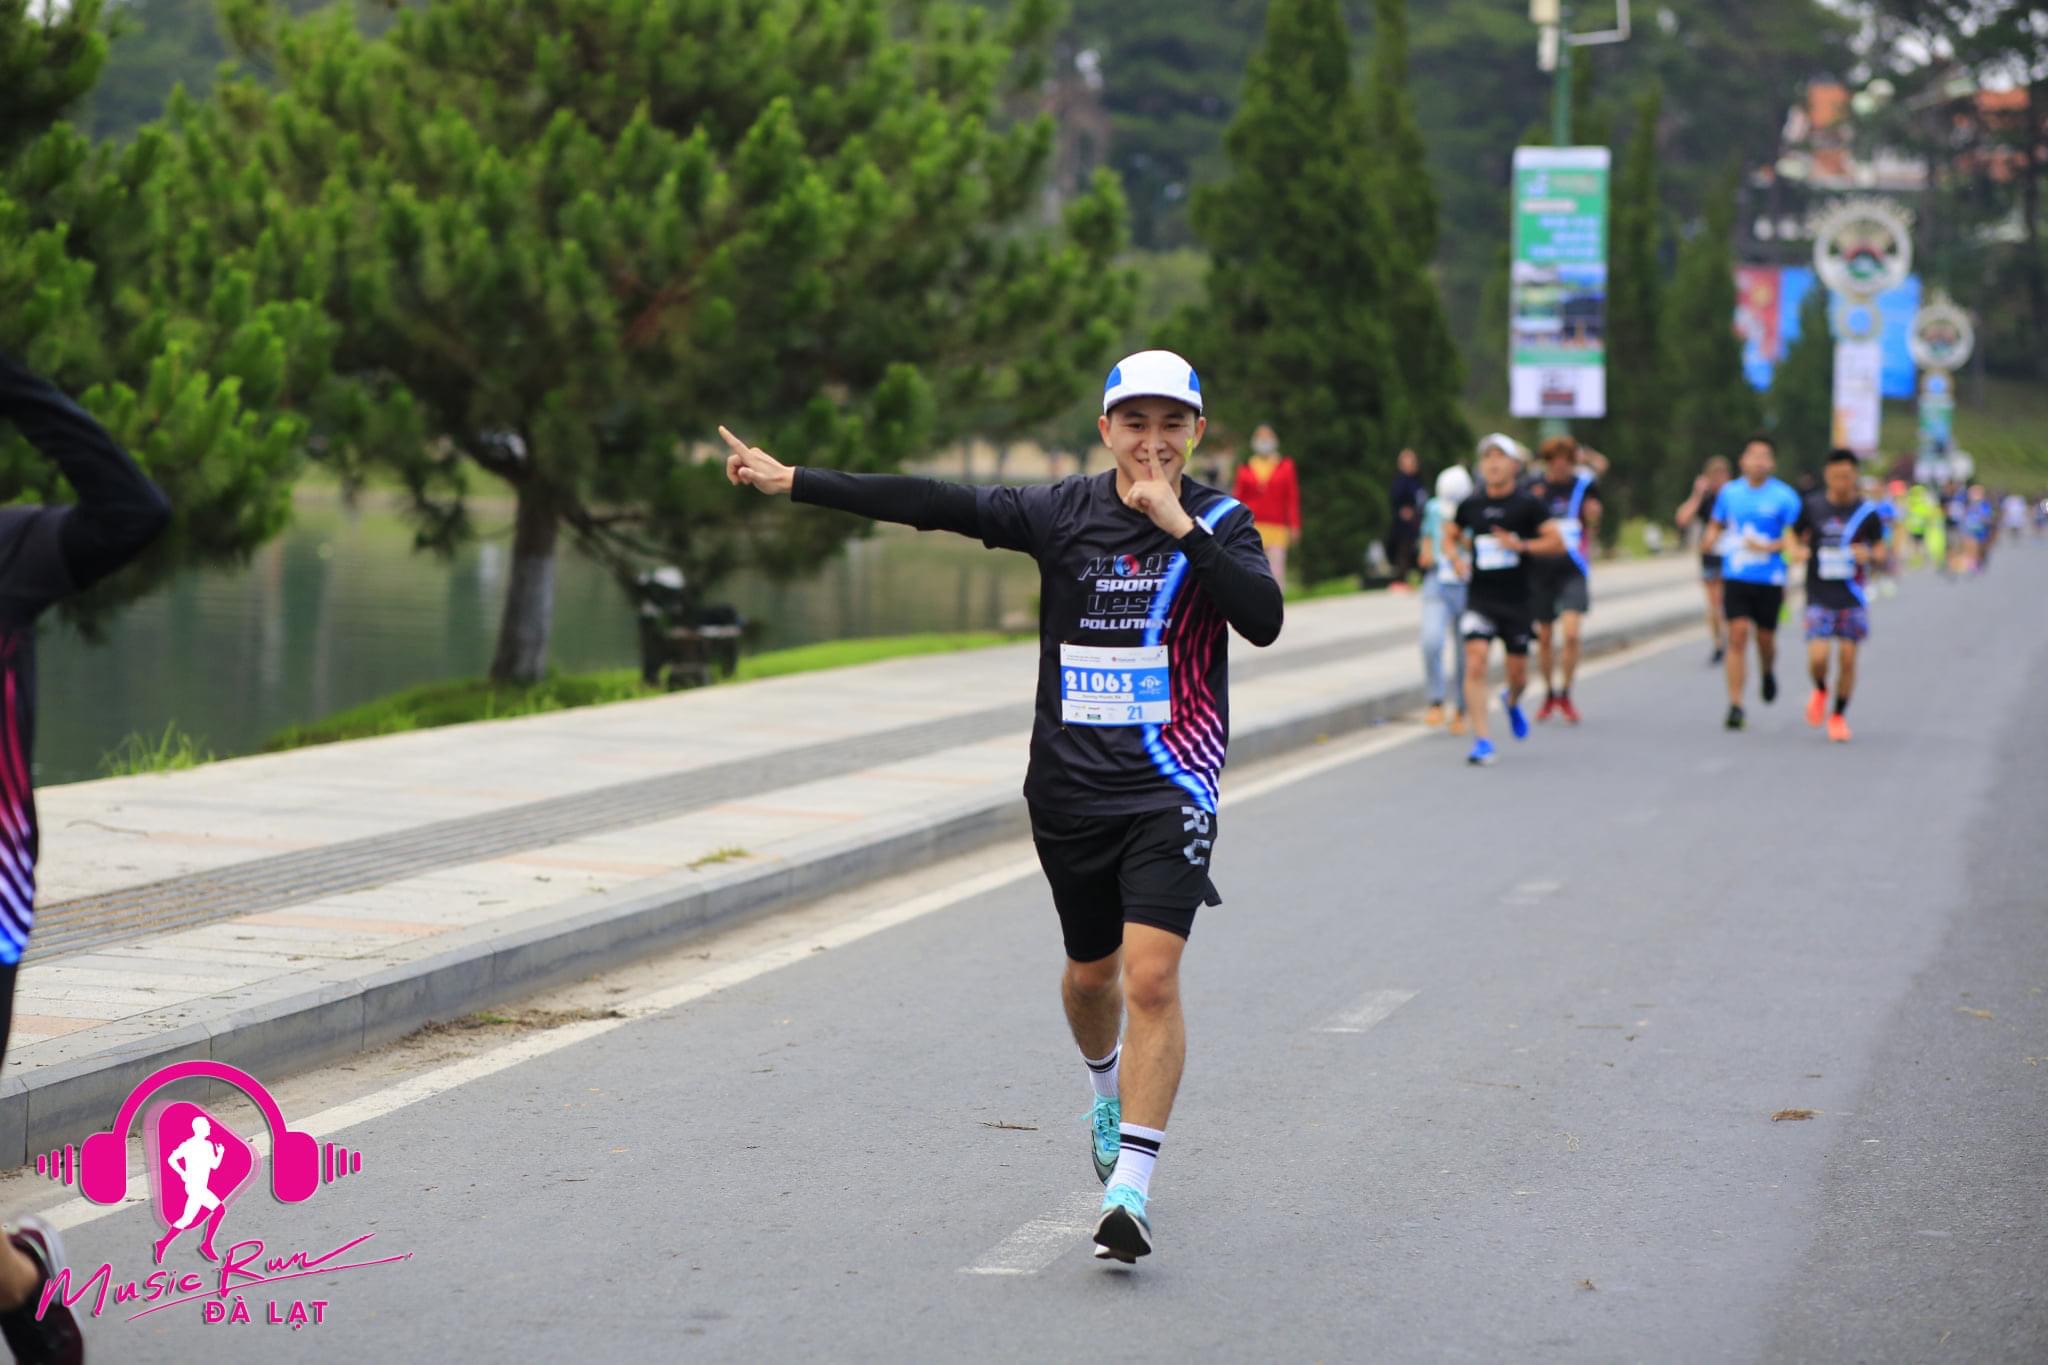 Thế Anh is happy to build a community that is passionate about running.